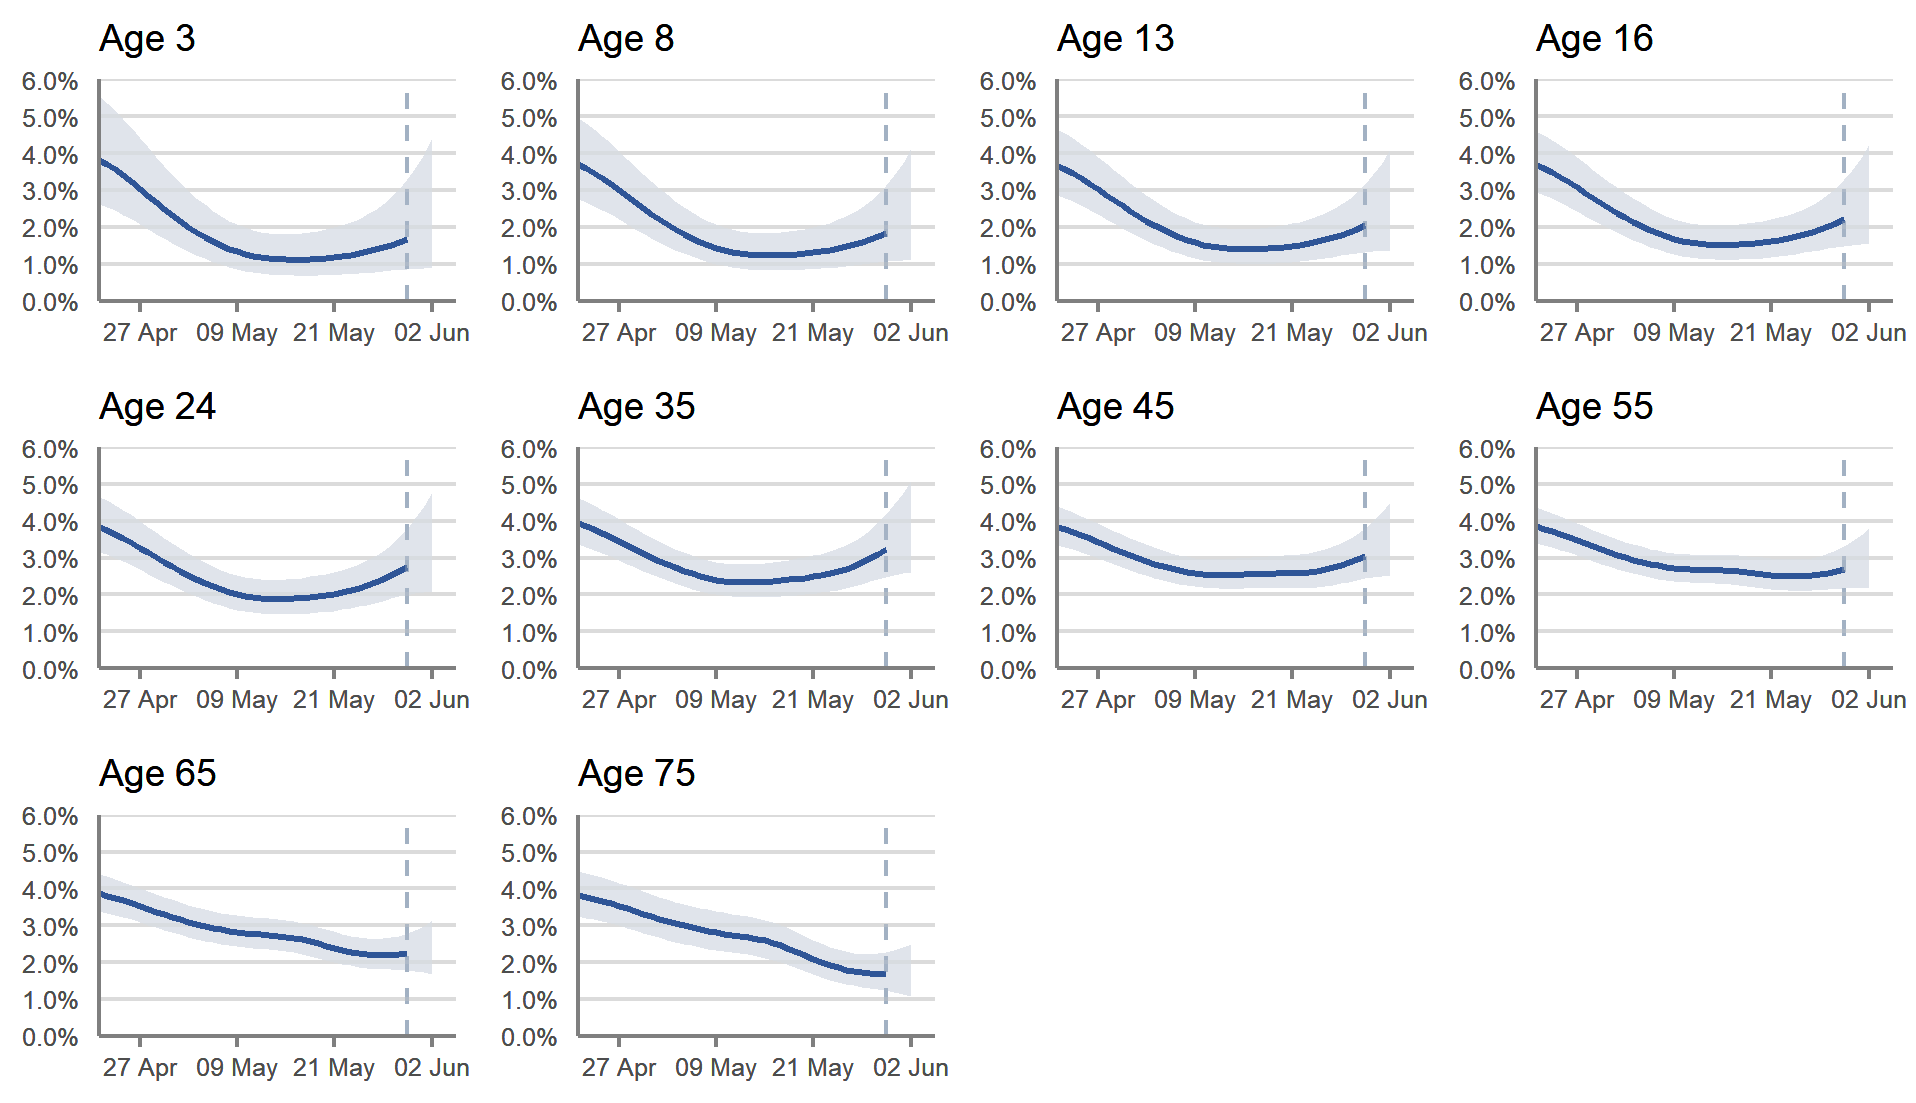 A set of ten line charts showing modelled daily estimates of the percentage of the population in Scotland testing positive for COVID-19 for those of age 3, 8, 13, 16, 24, 35, 45, 55, 65 and 75 years of age, between 22 April and 2 June 2022. Modelled daily estimates are represented by a blue line with 95% credible intervals in pale blue shading. In Scotland, there are possible signs of an increase in the estimated percentage of people testing positive for those aged around 30 to 40 years, but the trend is uncertain for all other age groups in the most recent week.